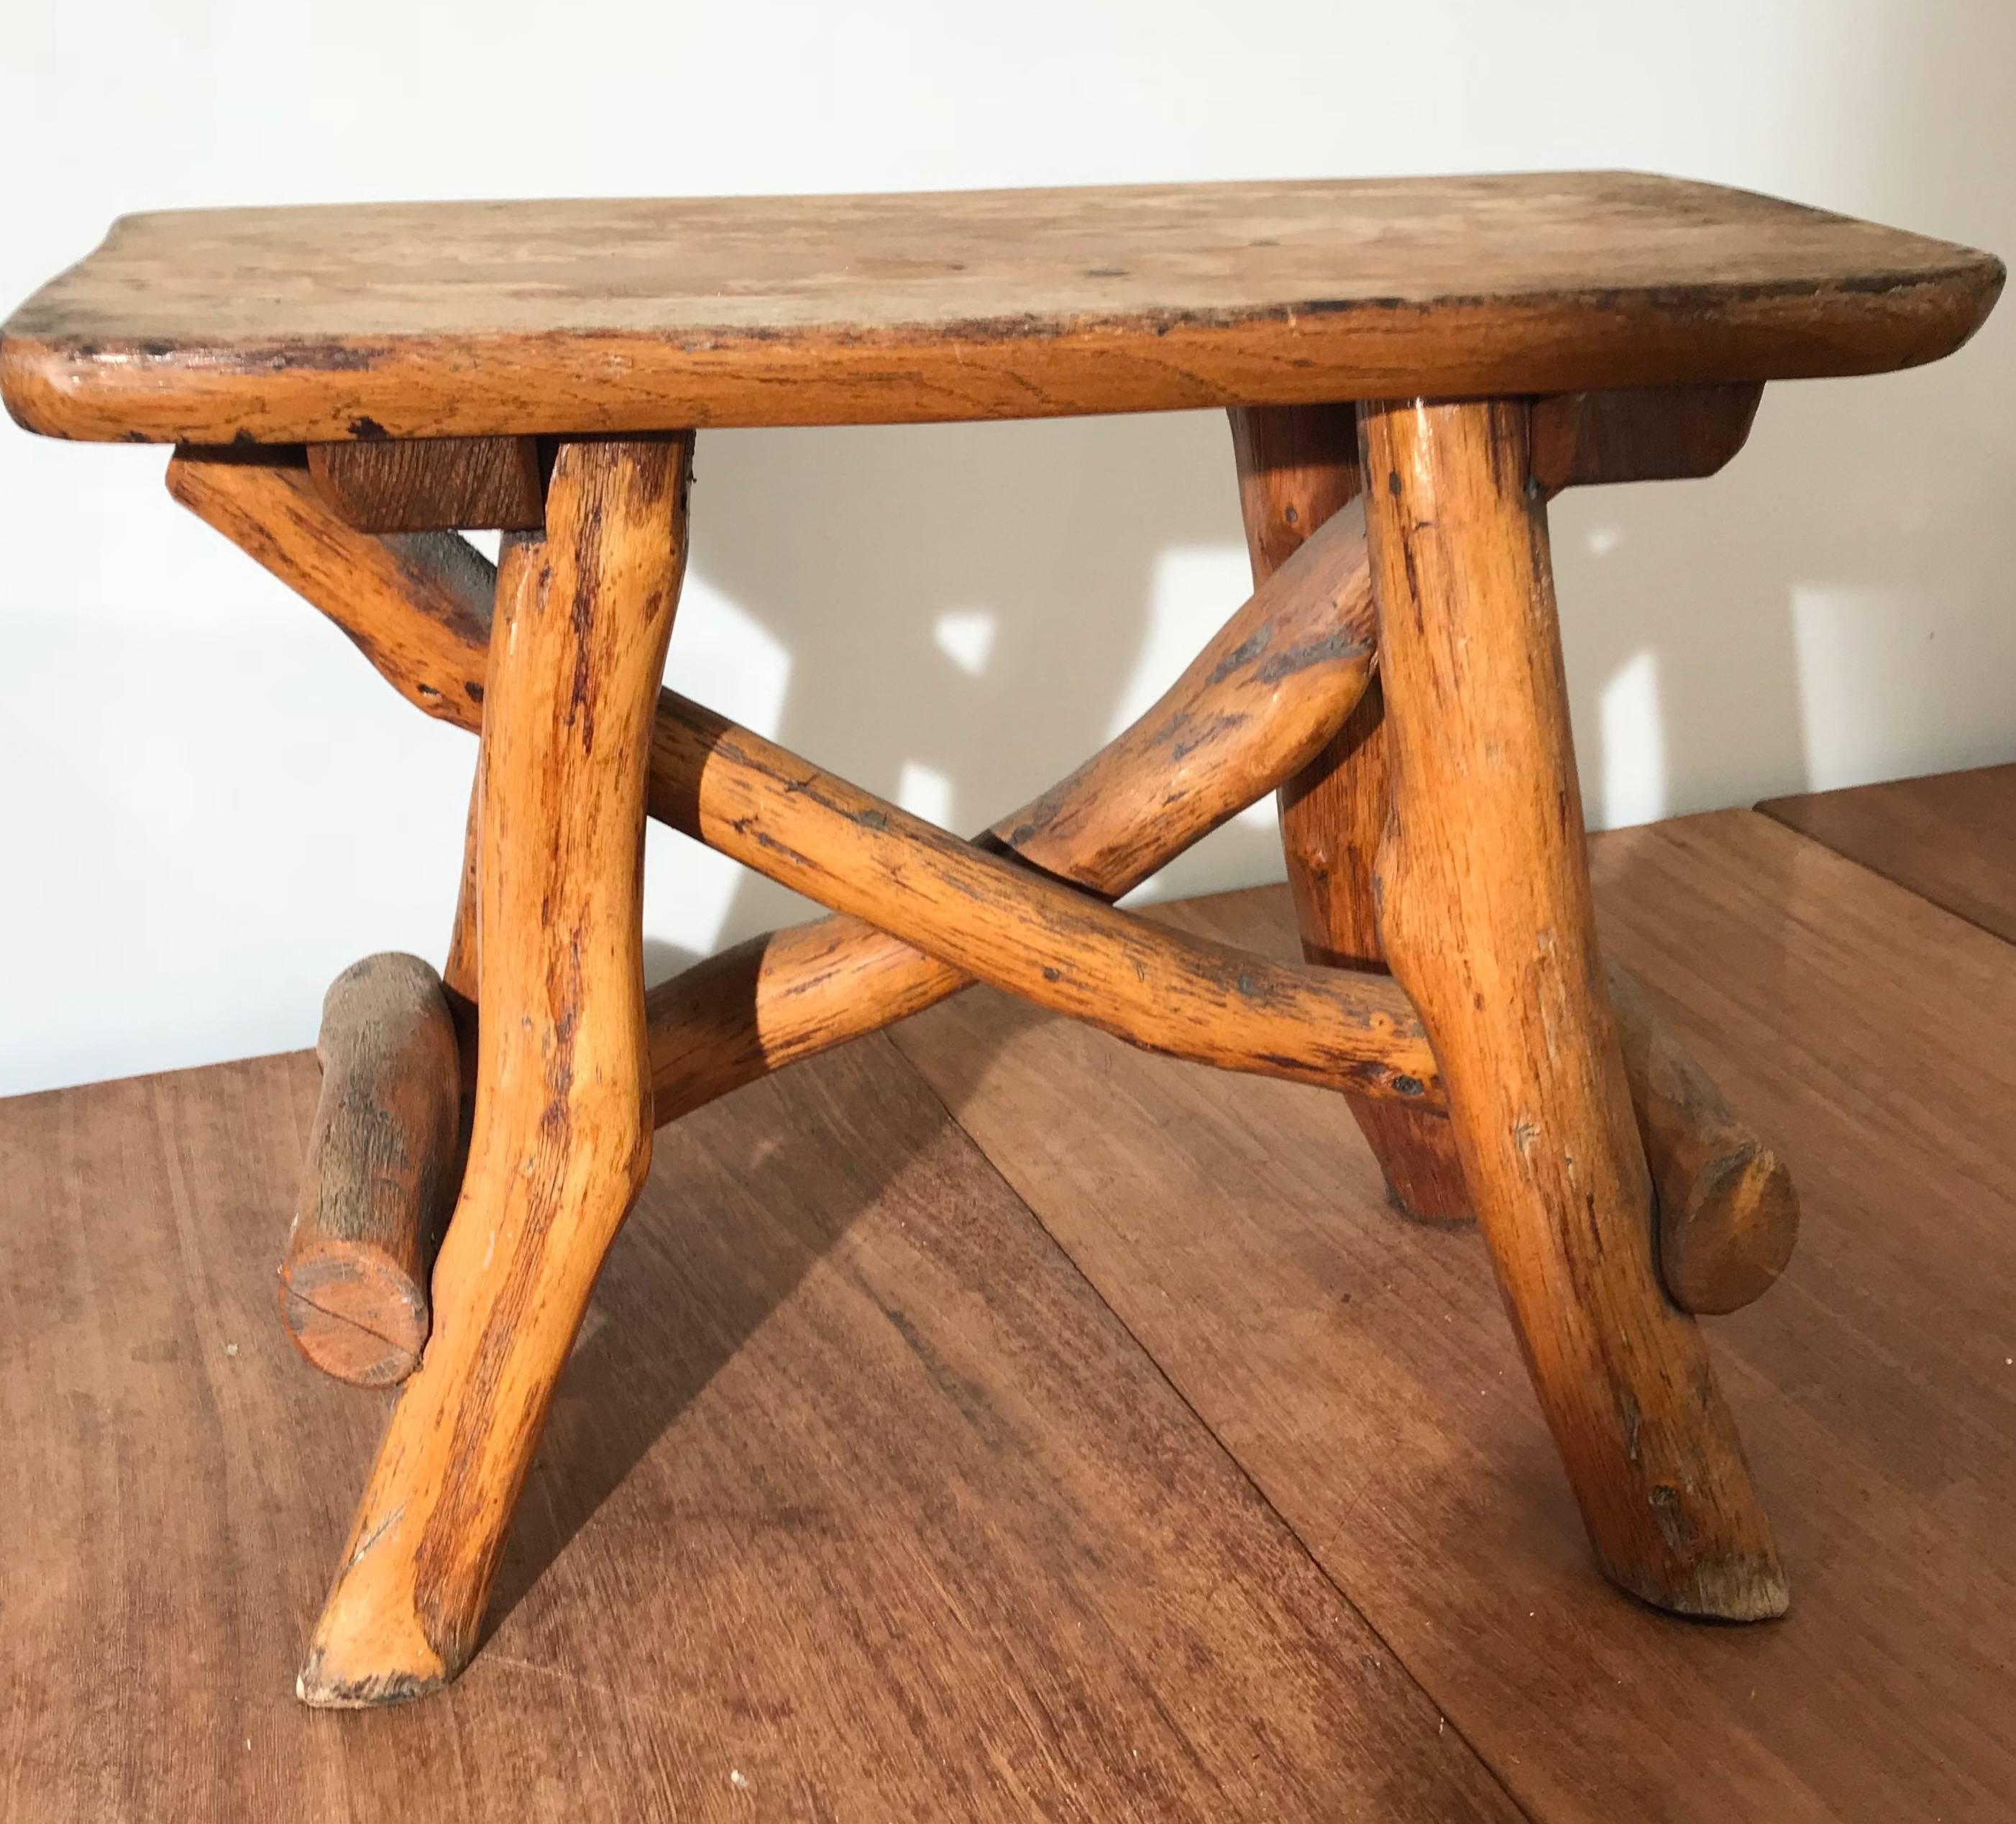 European Antique Hand-Crafted Rustic and Organic Oak Tree Stool for Indoor or Outdoor For Sale